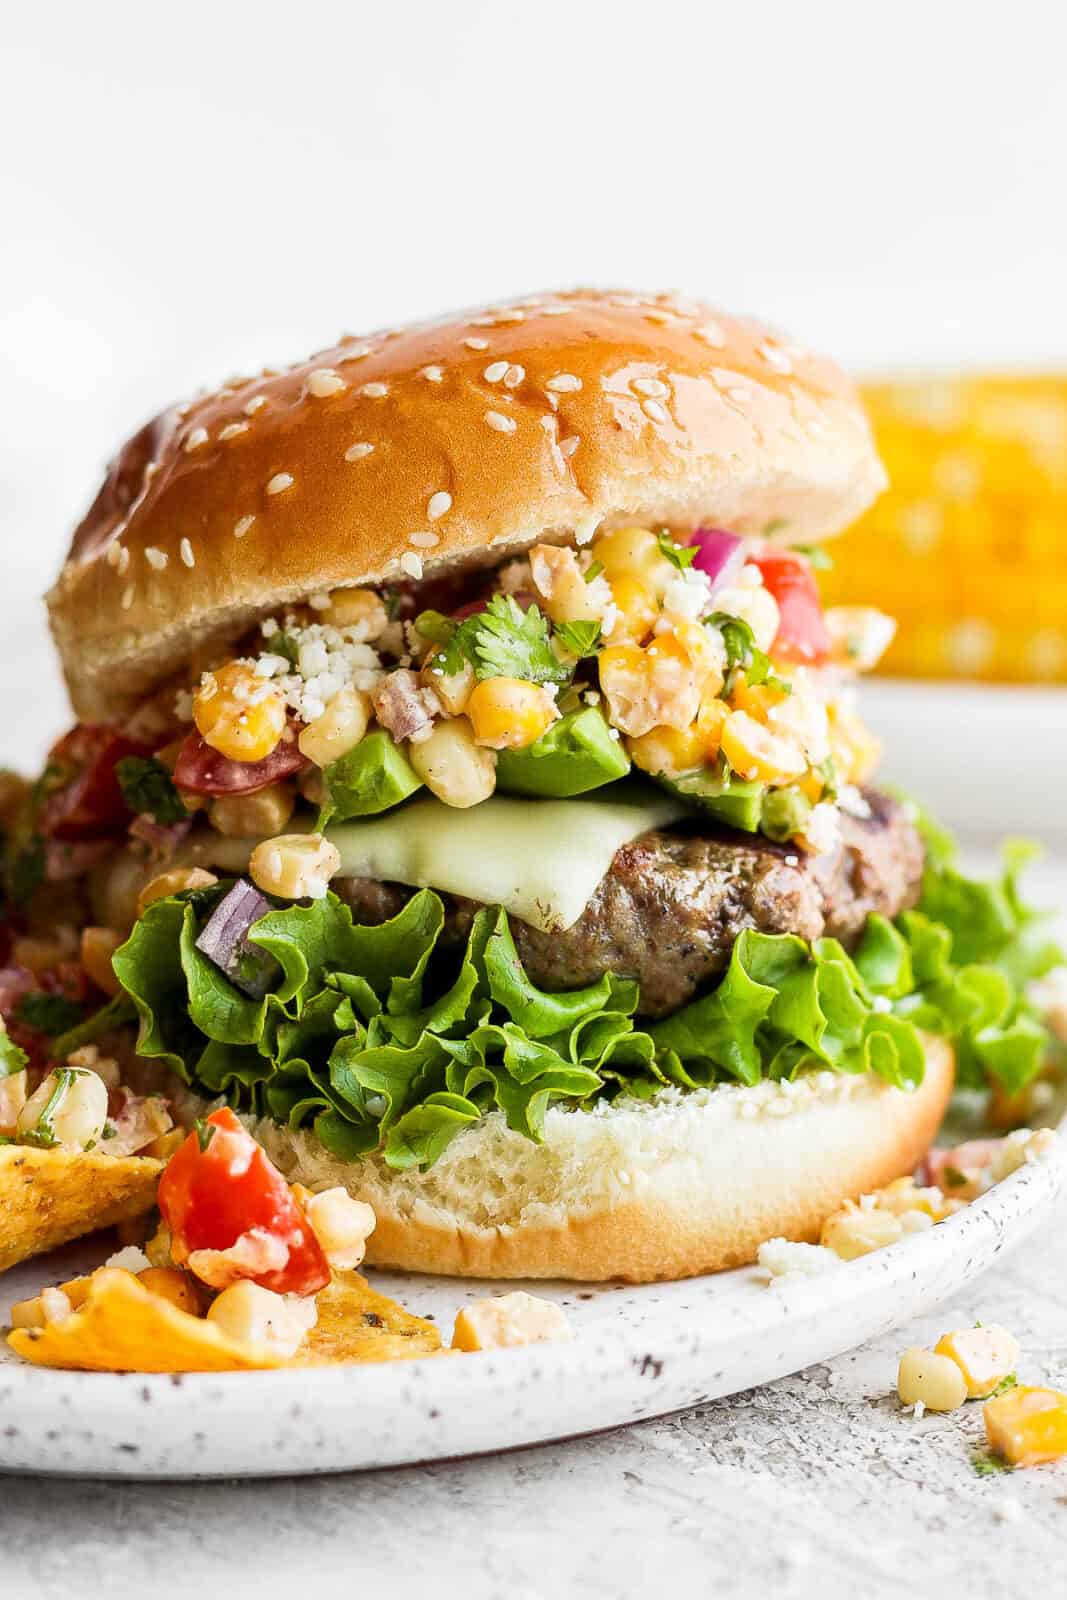 A mexican street corn burger on a plate with fries.